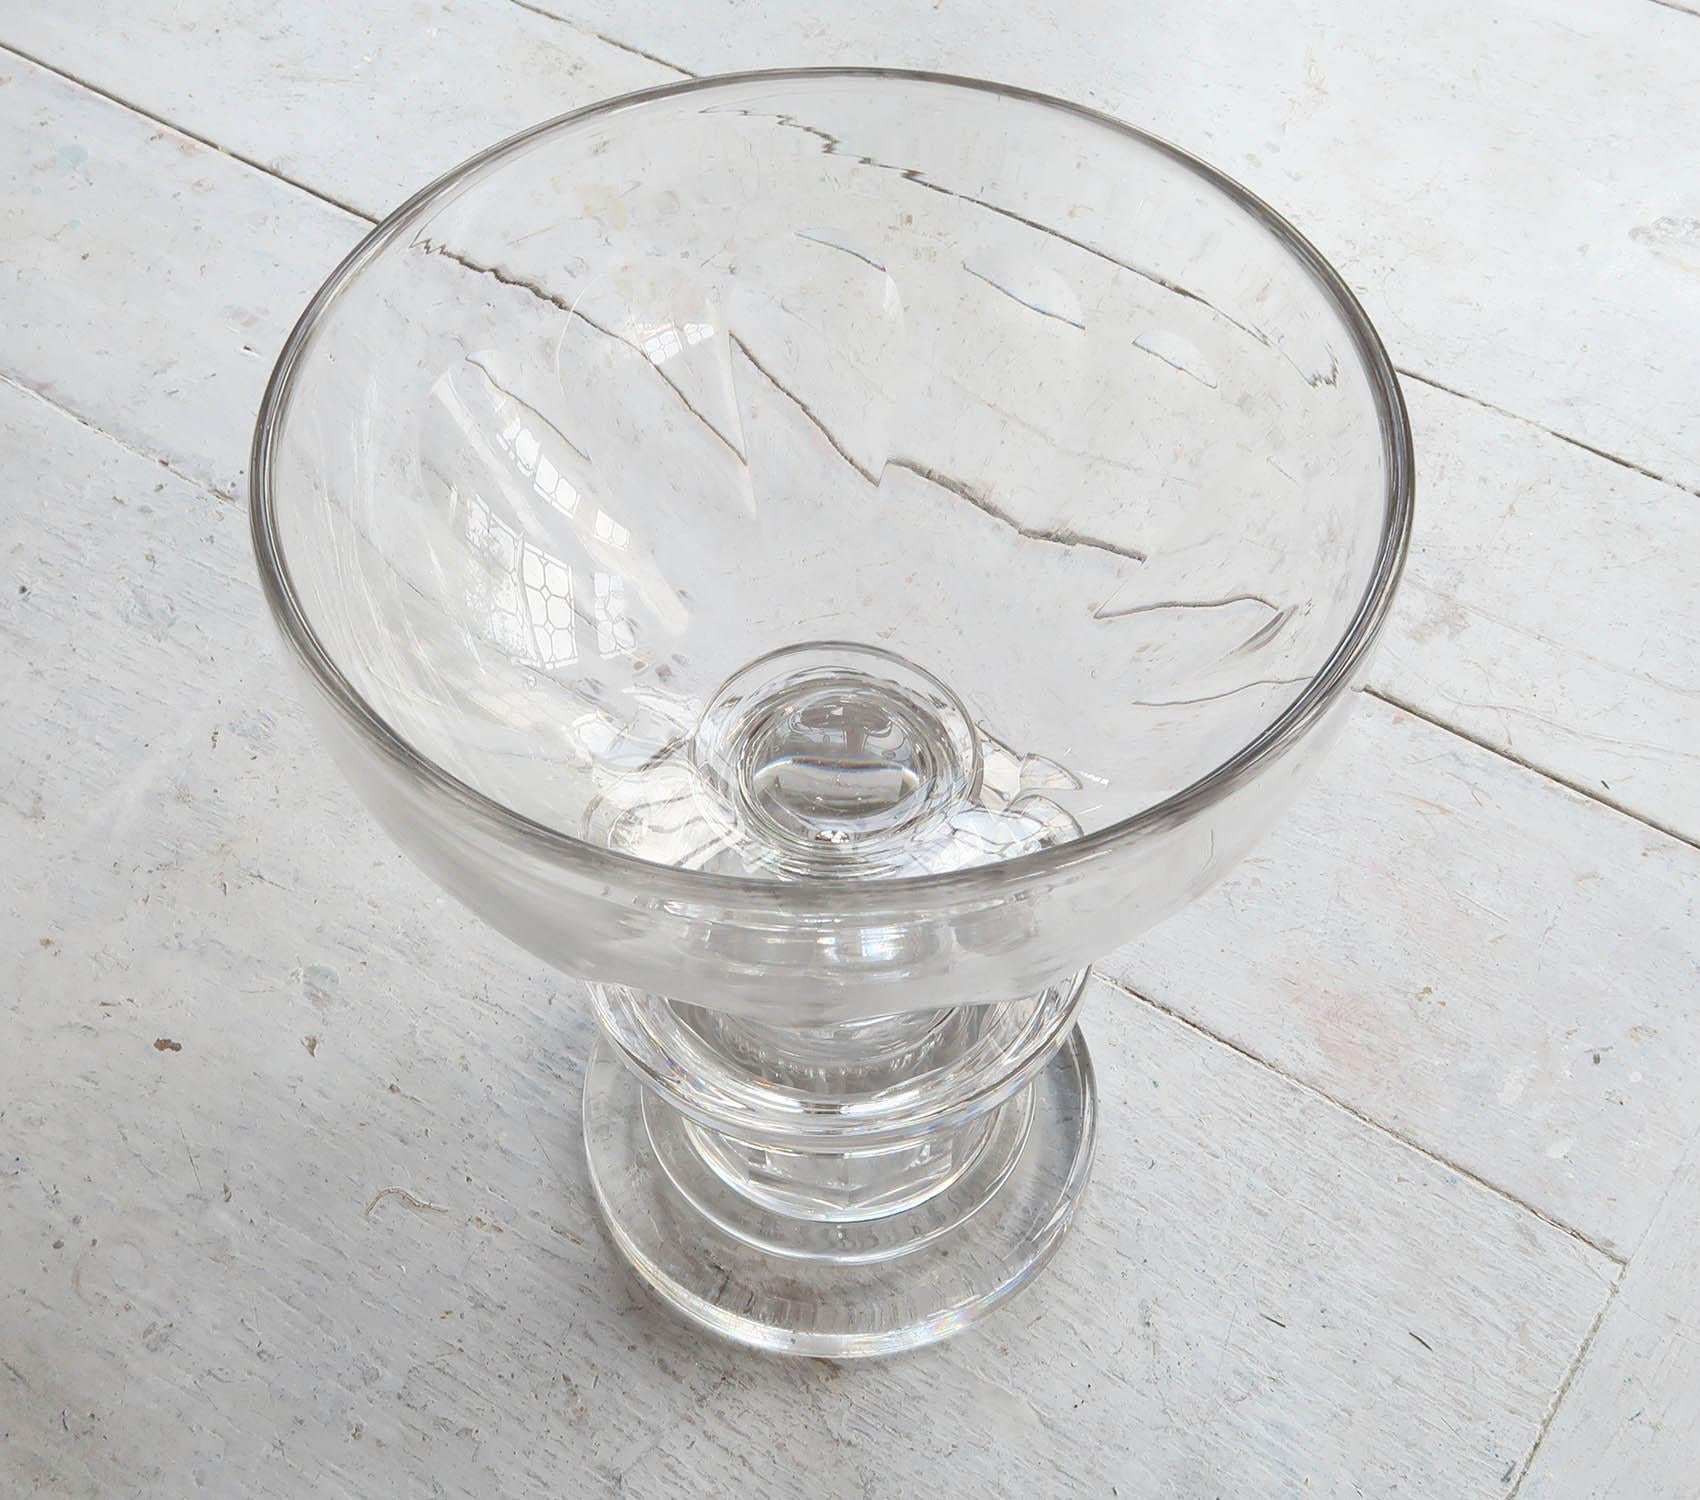  Large Antique Georgian Style Glass Pedestal Bowl, English, 19th Century For Sale 2